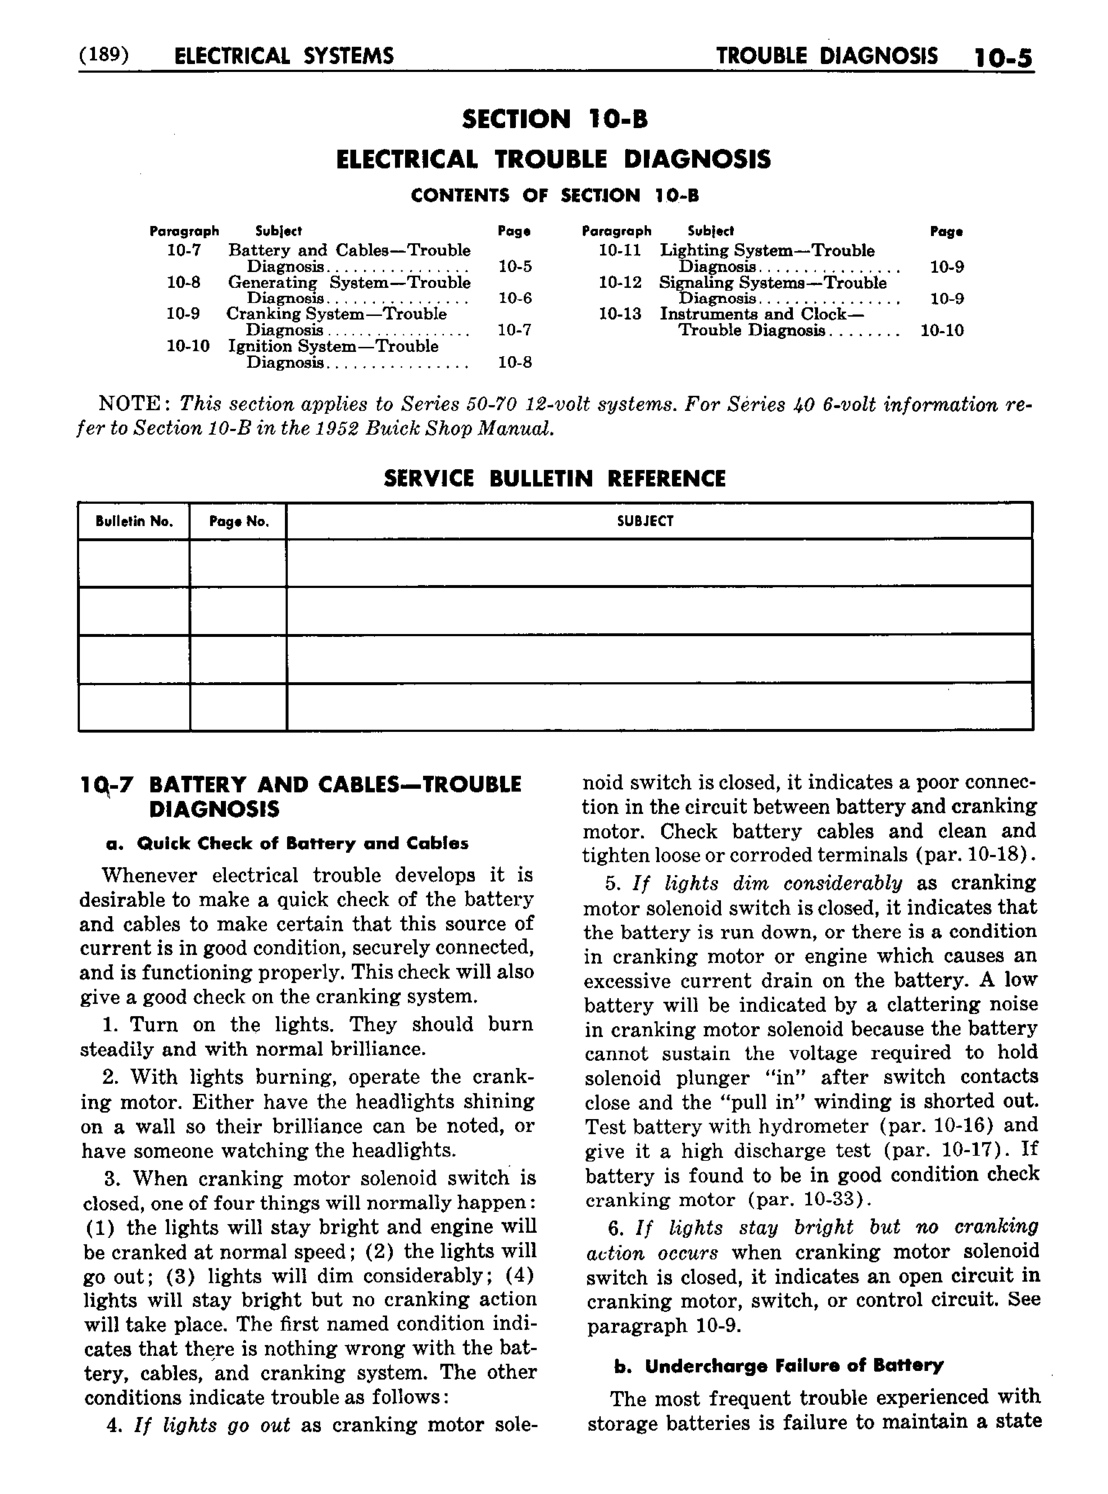 n_11 1953 Buick Shop Manual - Electrical Systems-005-005.jpg